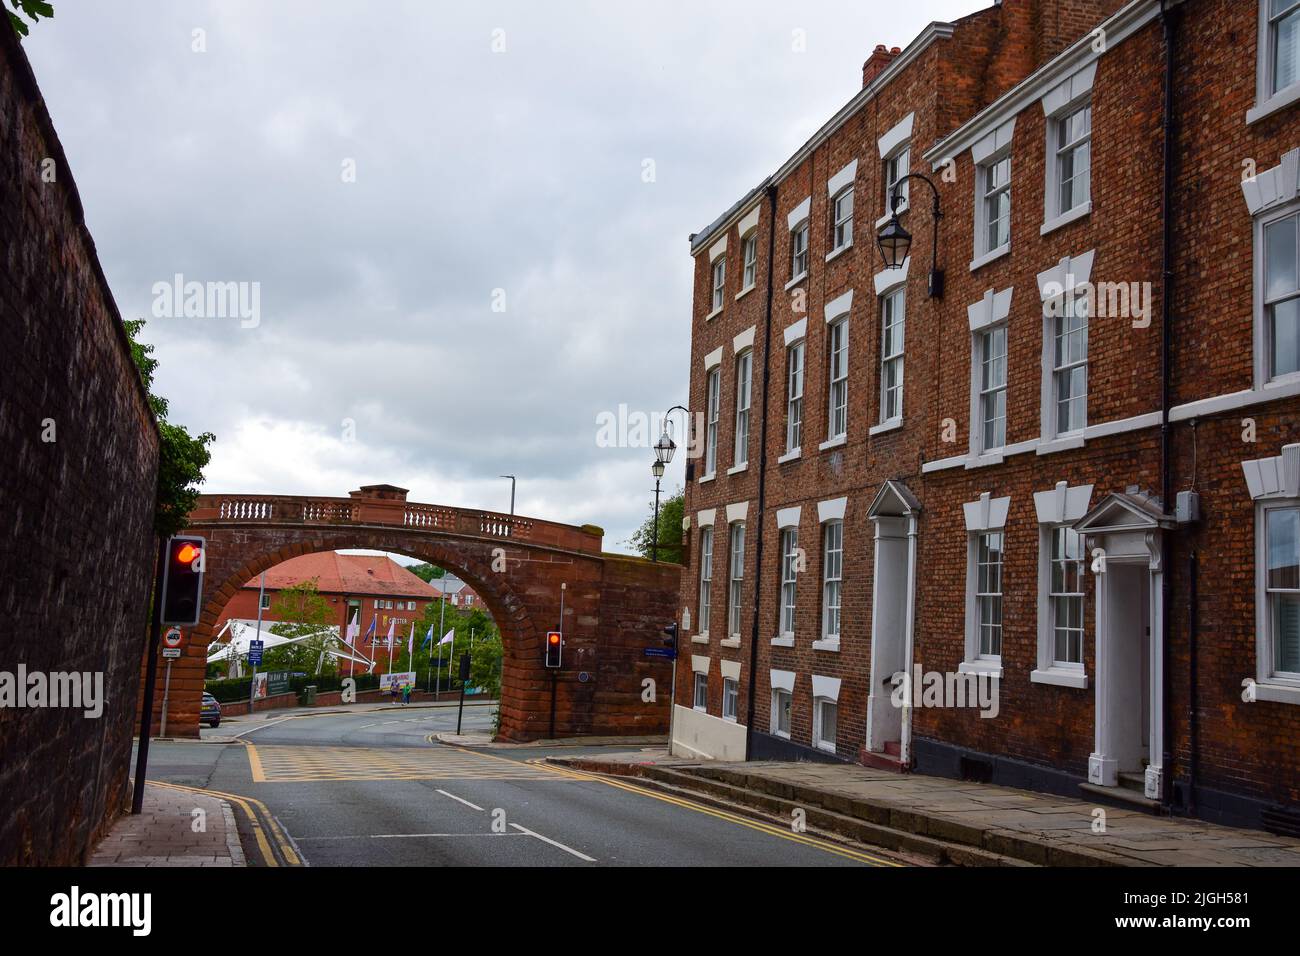 Chester, UK: Jul 3, 2022: Watergate is an access point through the Roman city walls of Chester. It was built to replace a medieval gate. Stock Photo